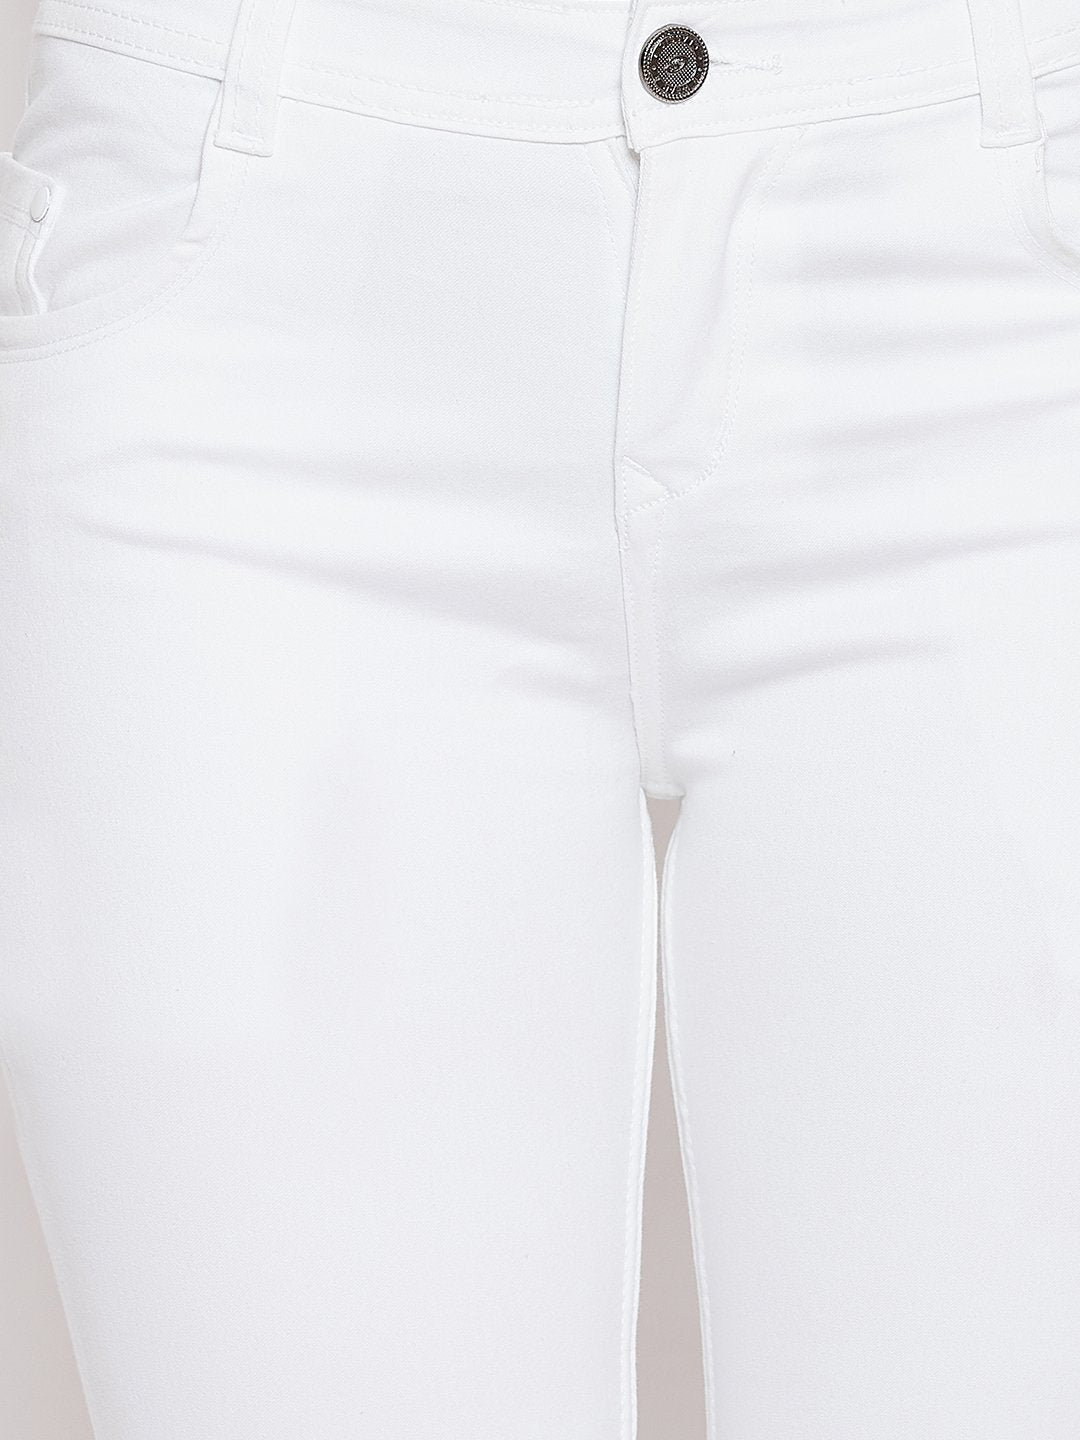 Slim Fit Stretchable White Jeans - NiftyJeans